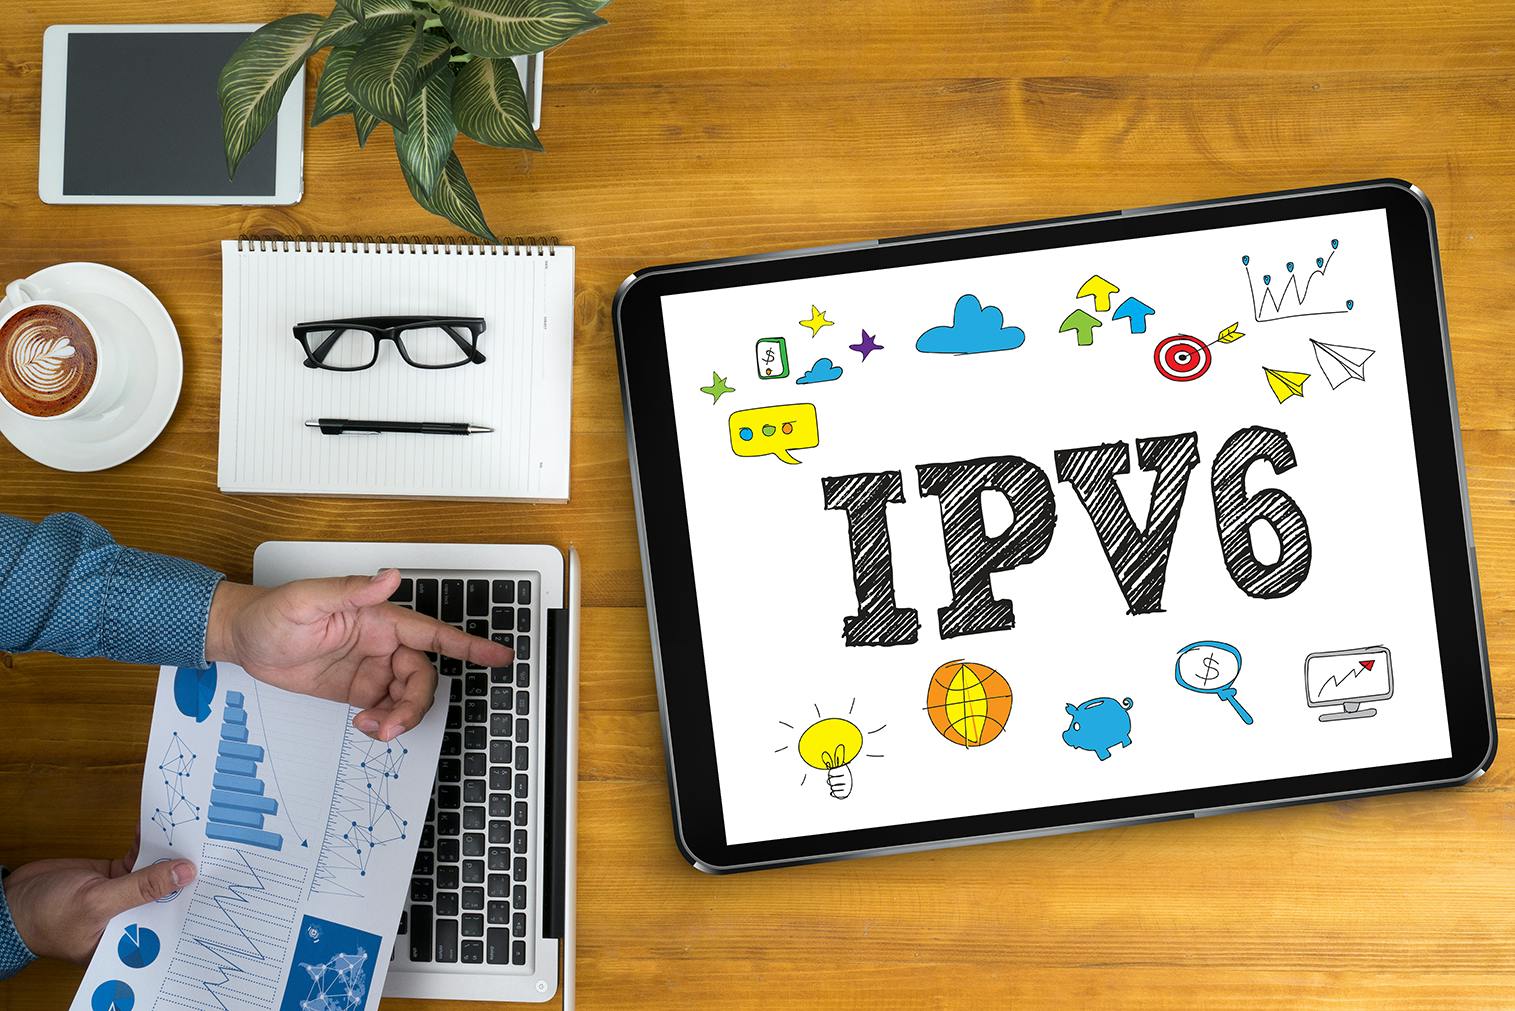 a stock photo showing IPv6 on a mobile device screen